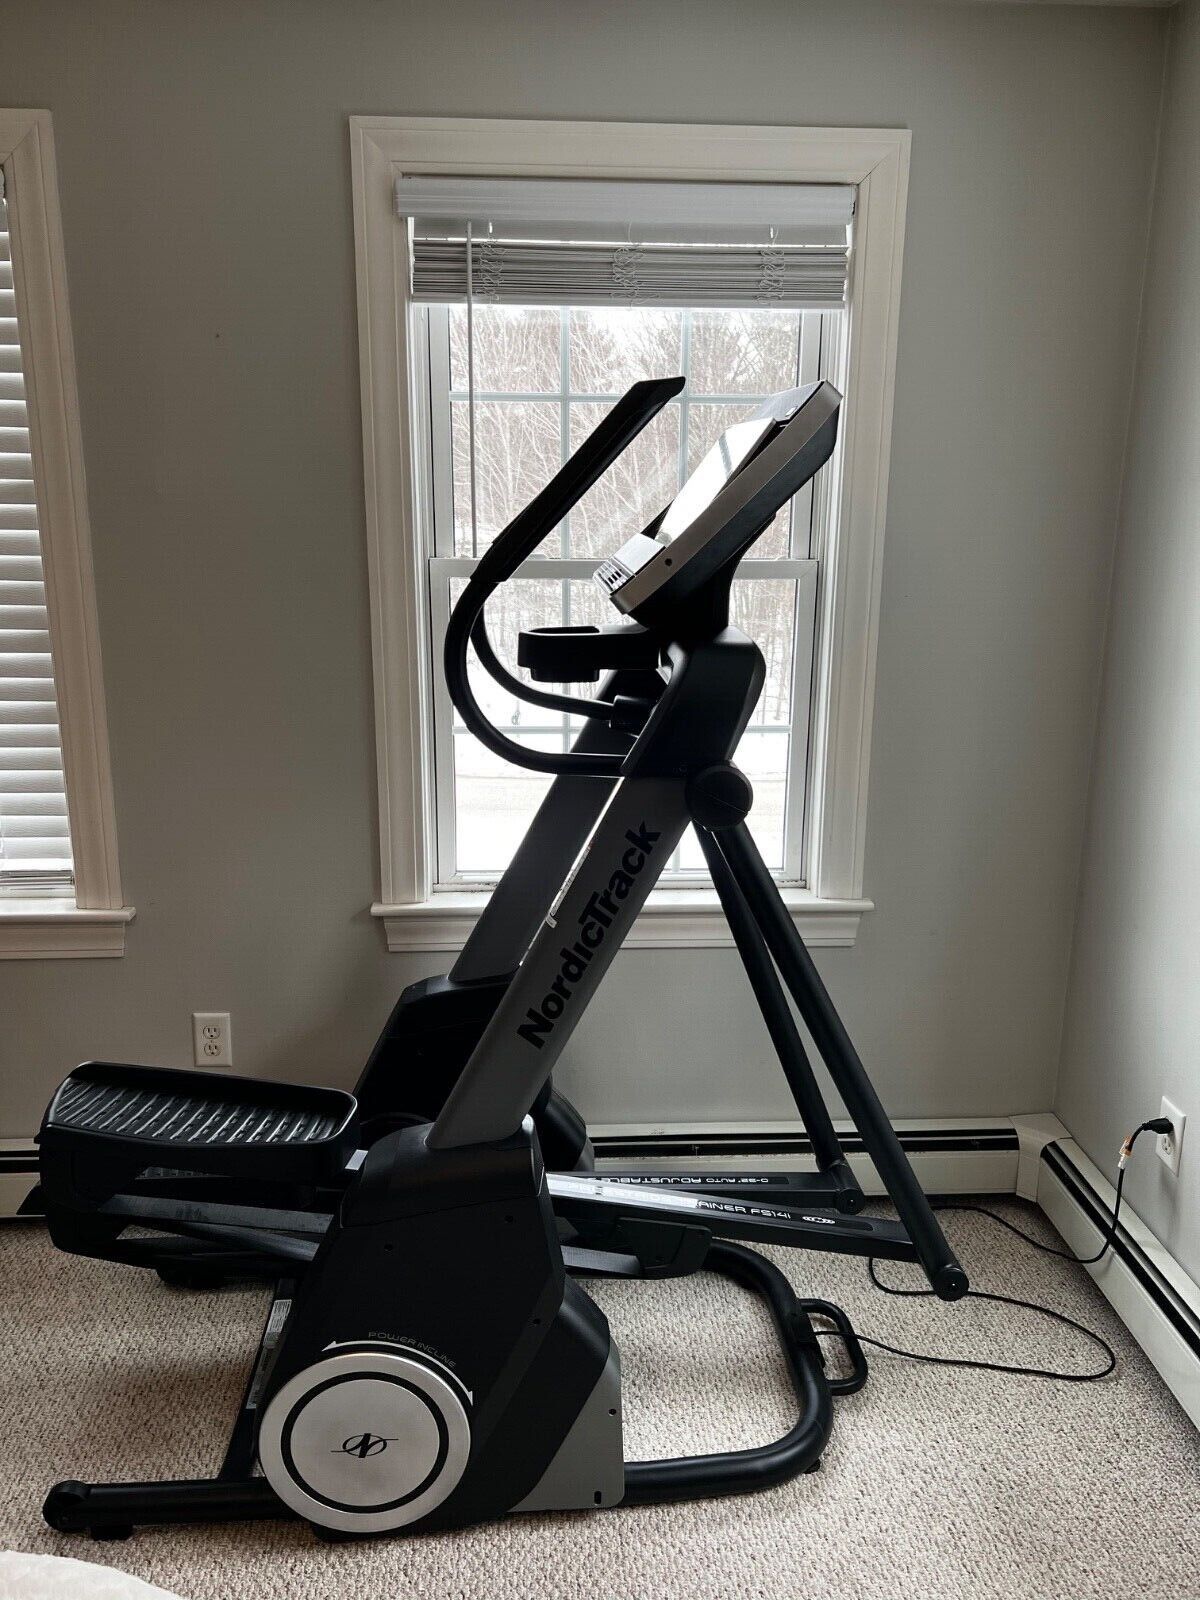 Open Box Nordictrack Elliptical And Stair Stepper 